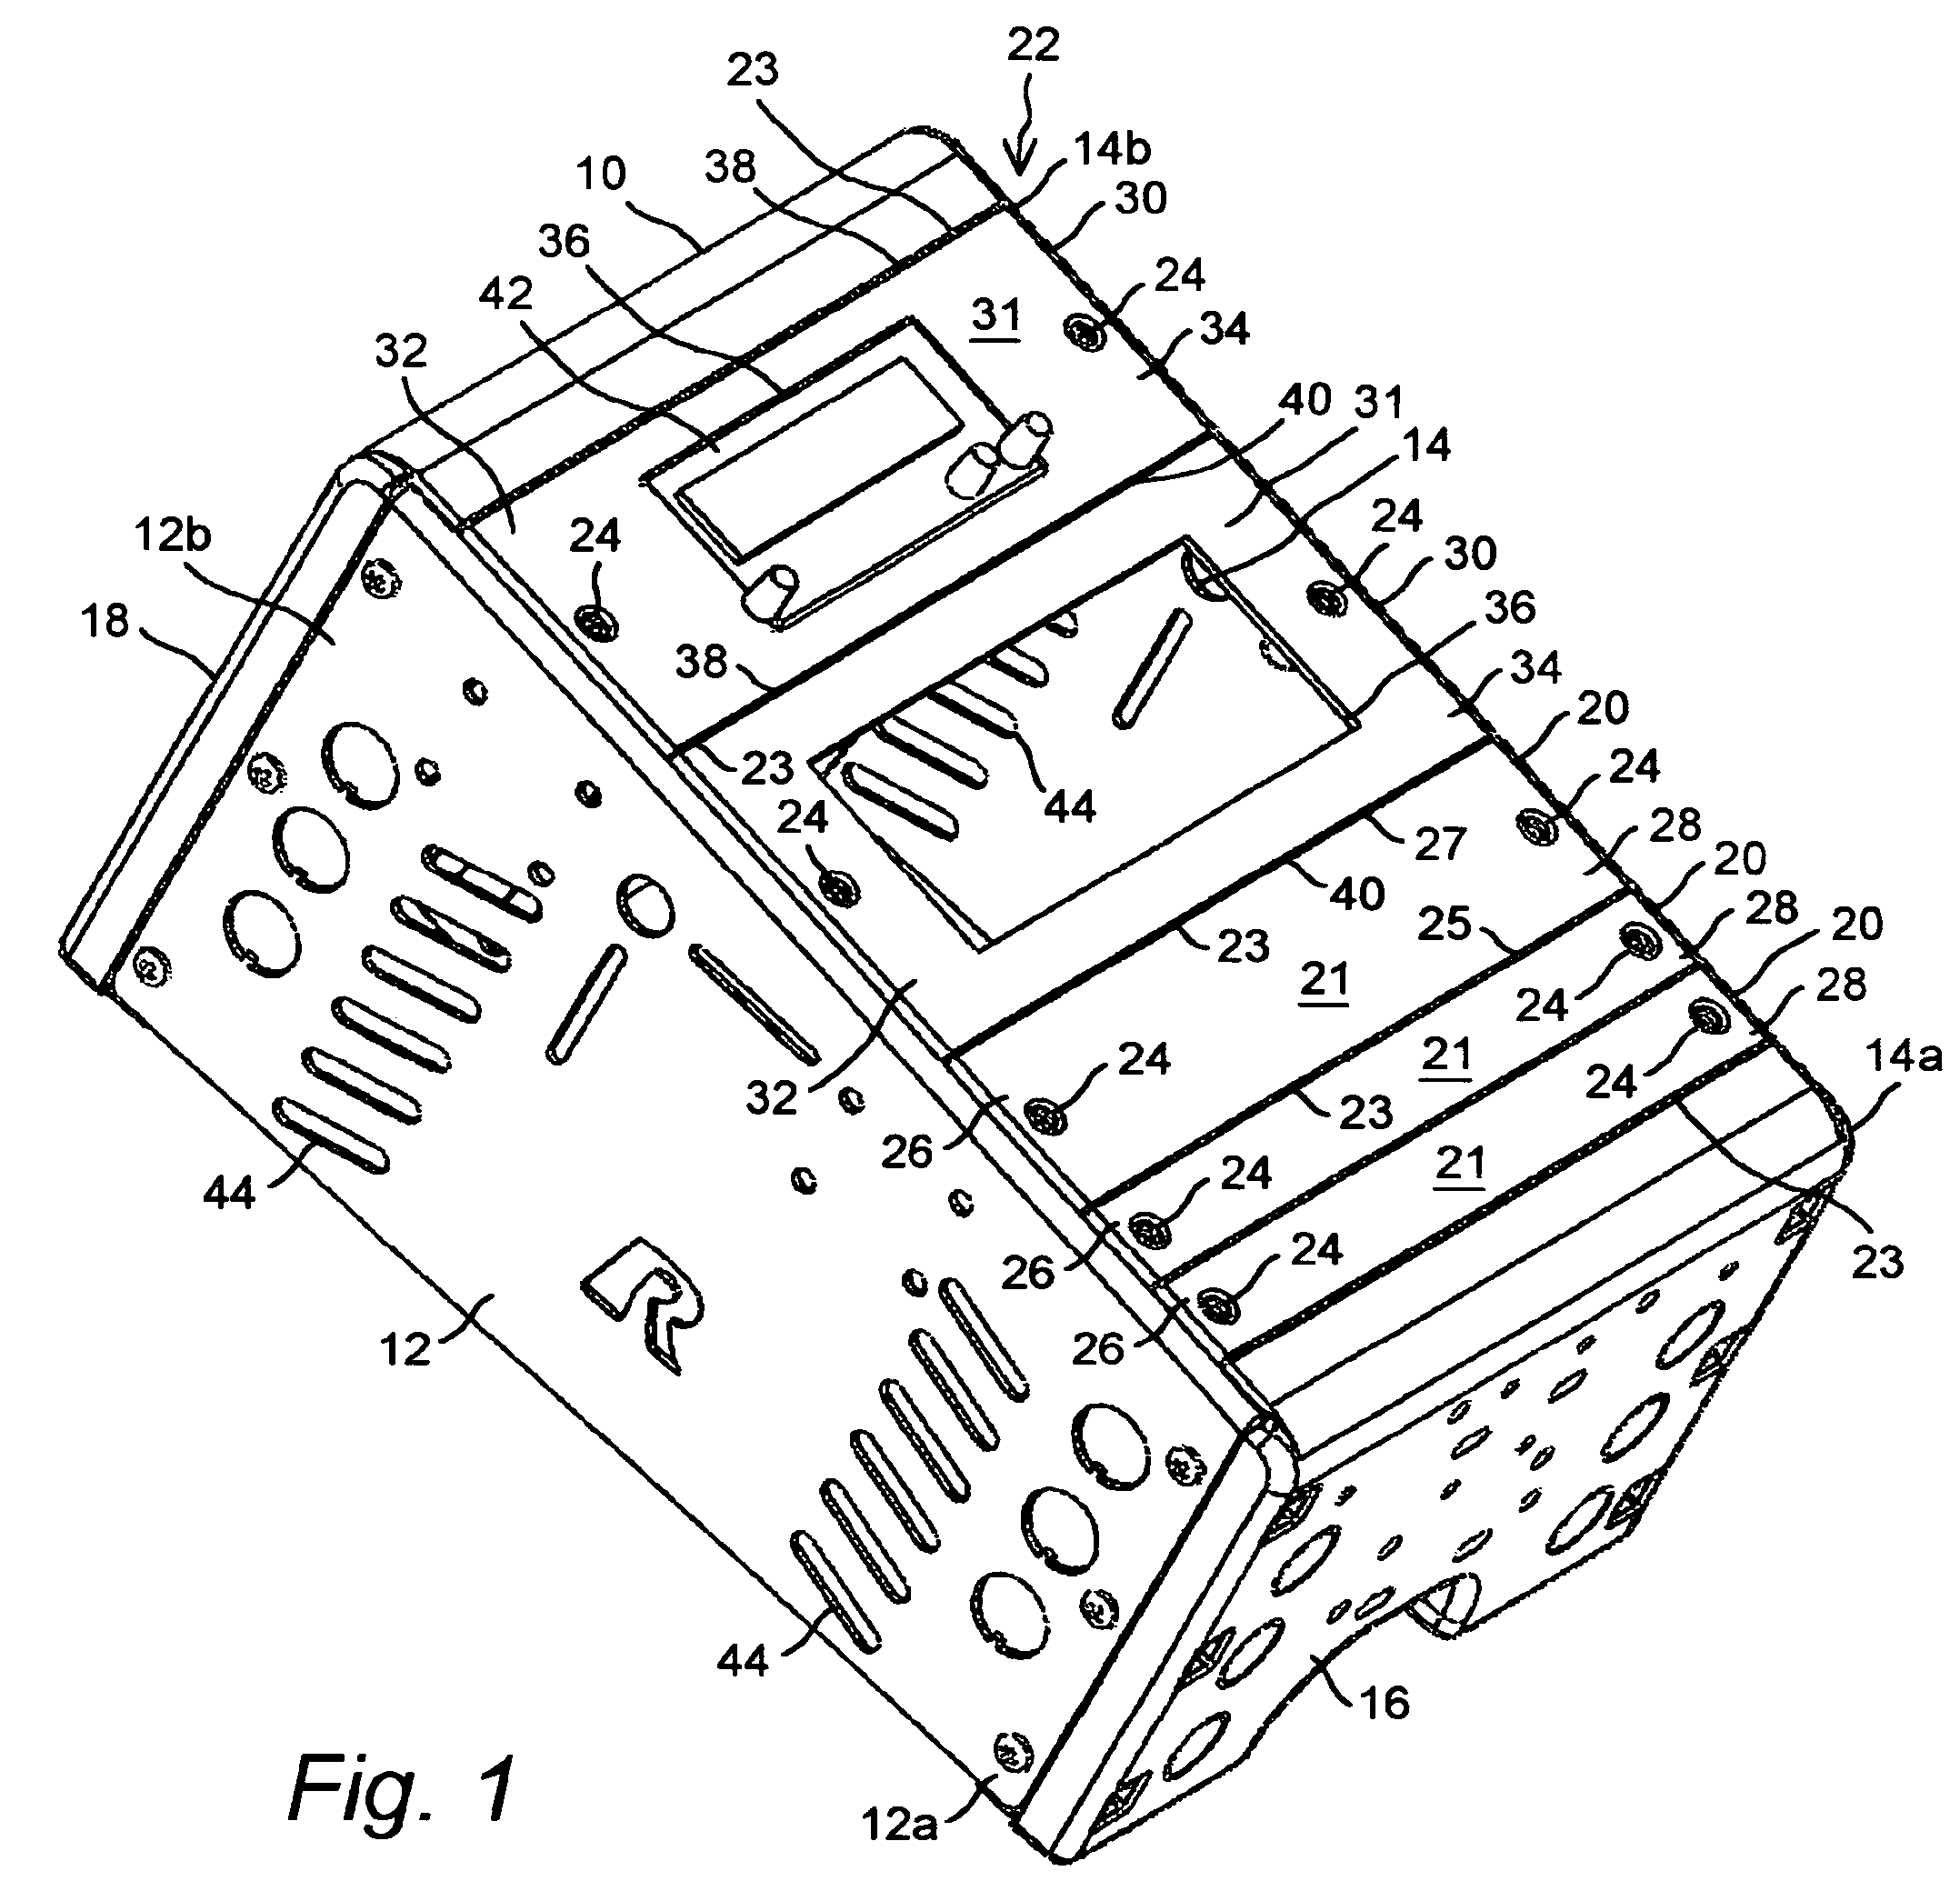 Reconfigurable console mount having a plurality of interchangeable tongue-and-groove blank and equipment mounting panels and quick disconnect clamps